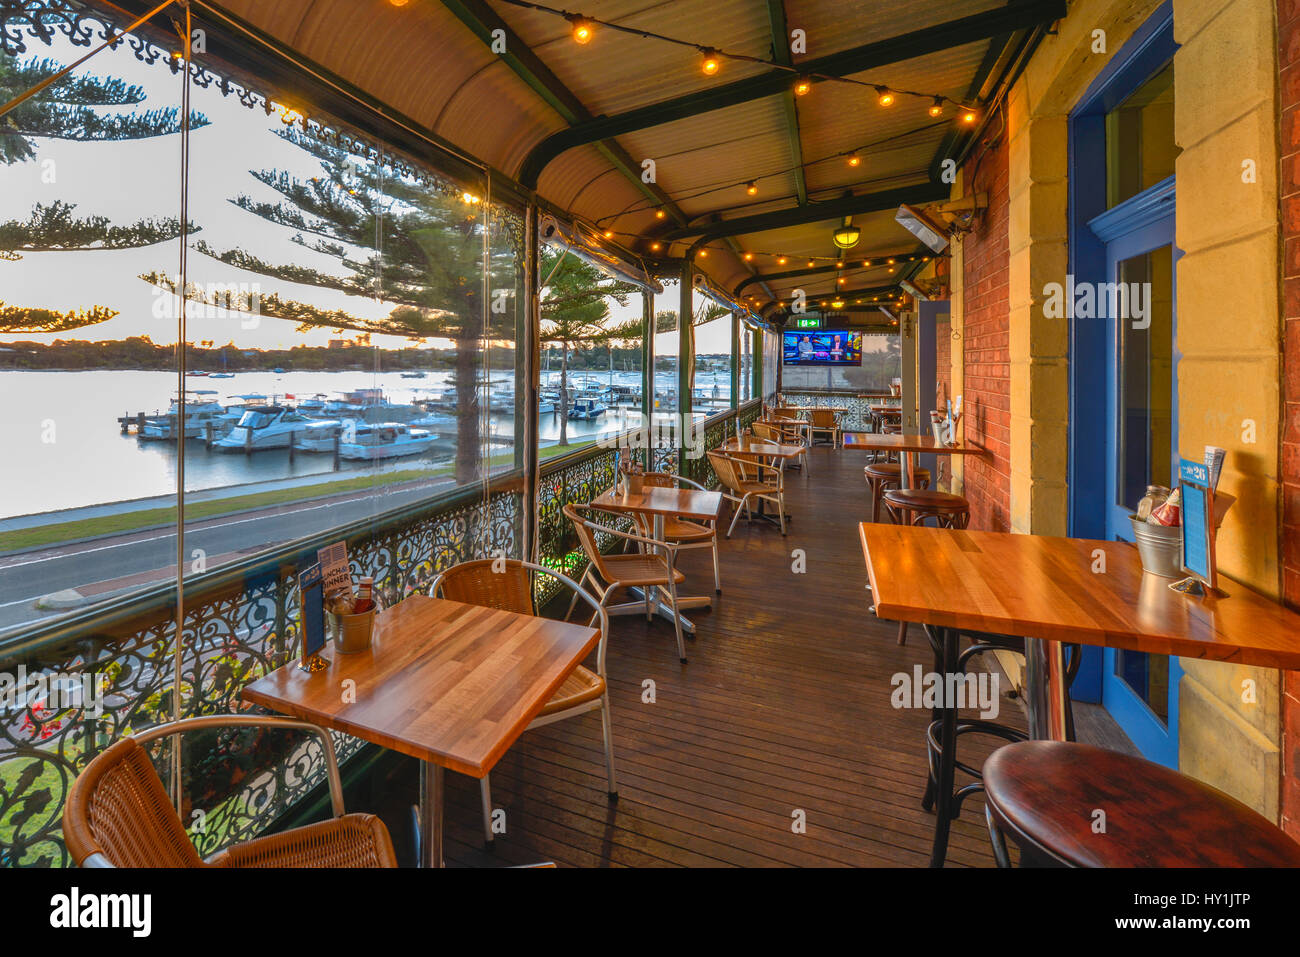 View from the balcony of a typical early 1900's pub, overlooking a marina on the Swan River, Fremantle, Perth, Western Australia. Stock Photo